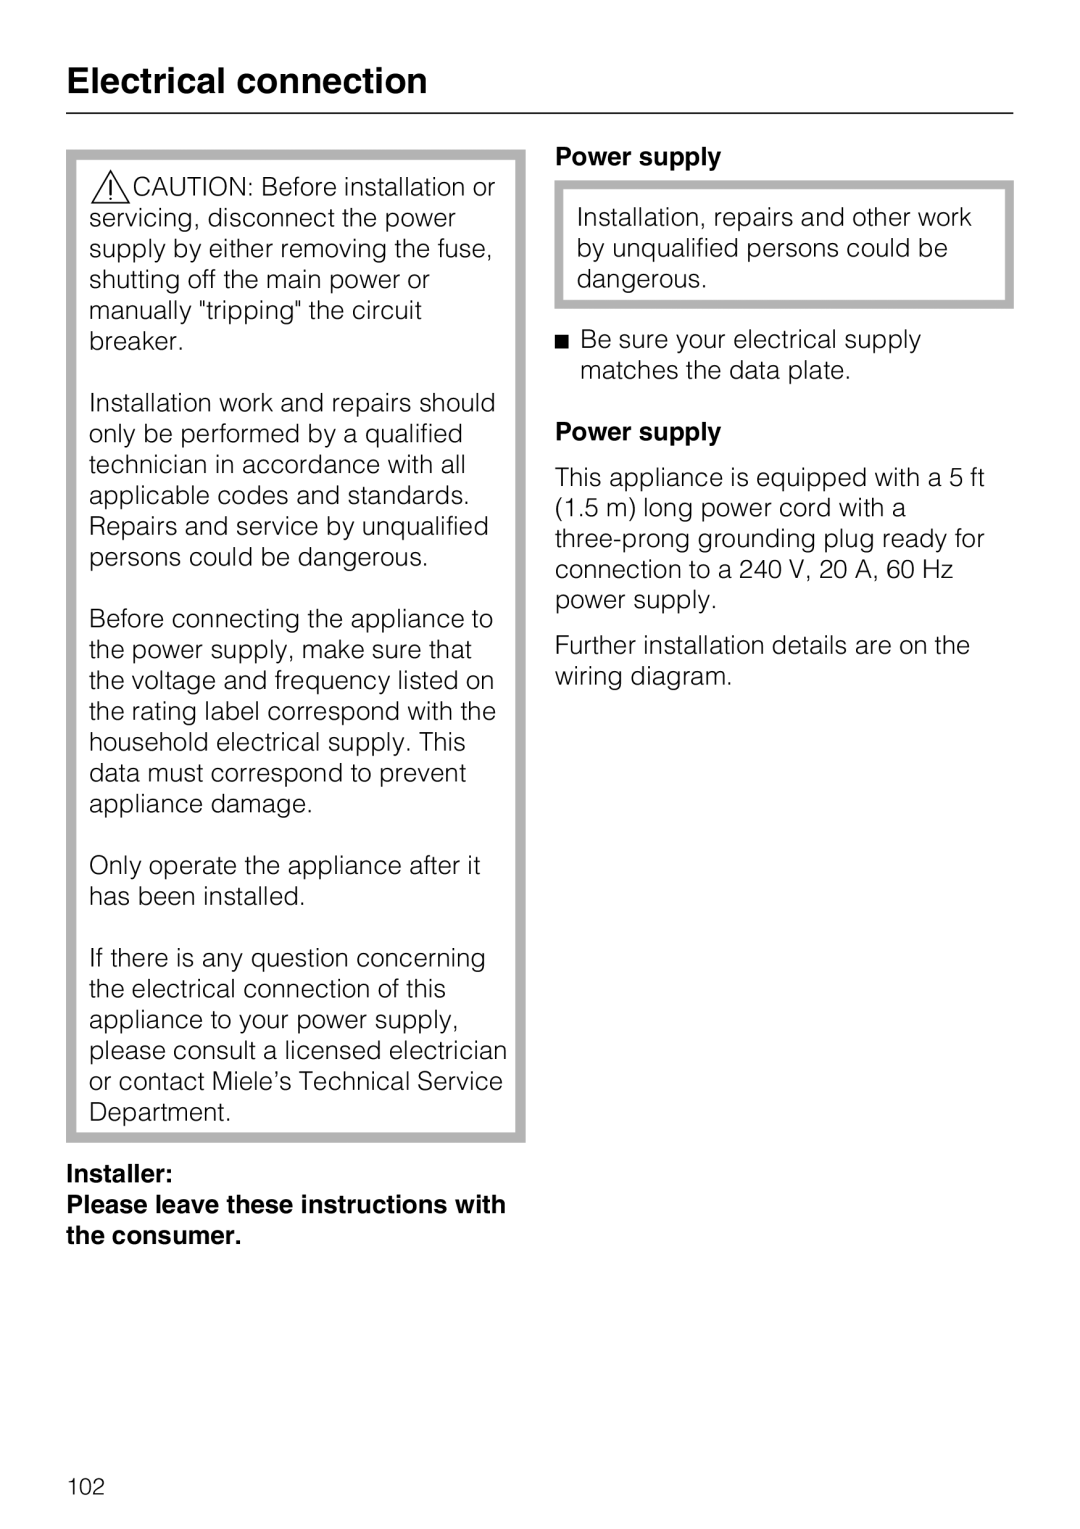 Miele 09 800 830 Electrical connection, Installer, Please leave these instructions with the consumer, Power supply 